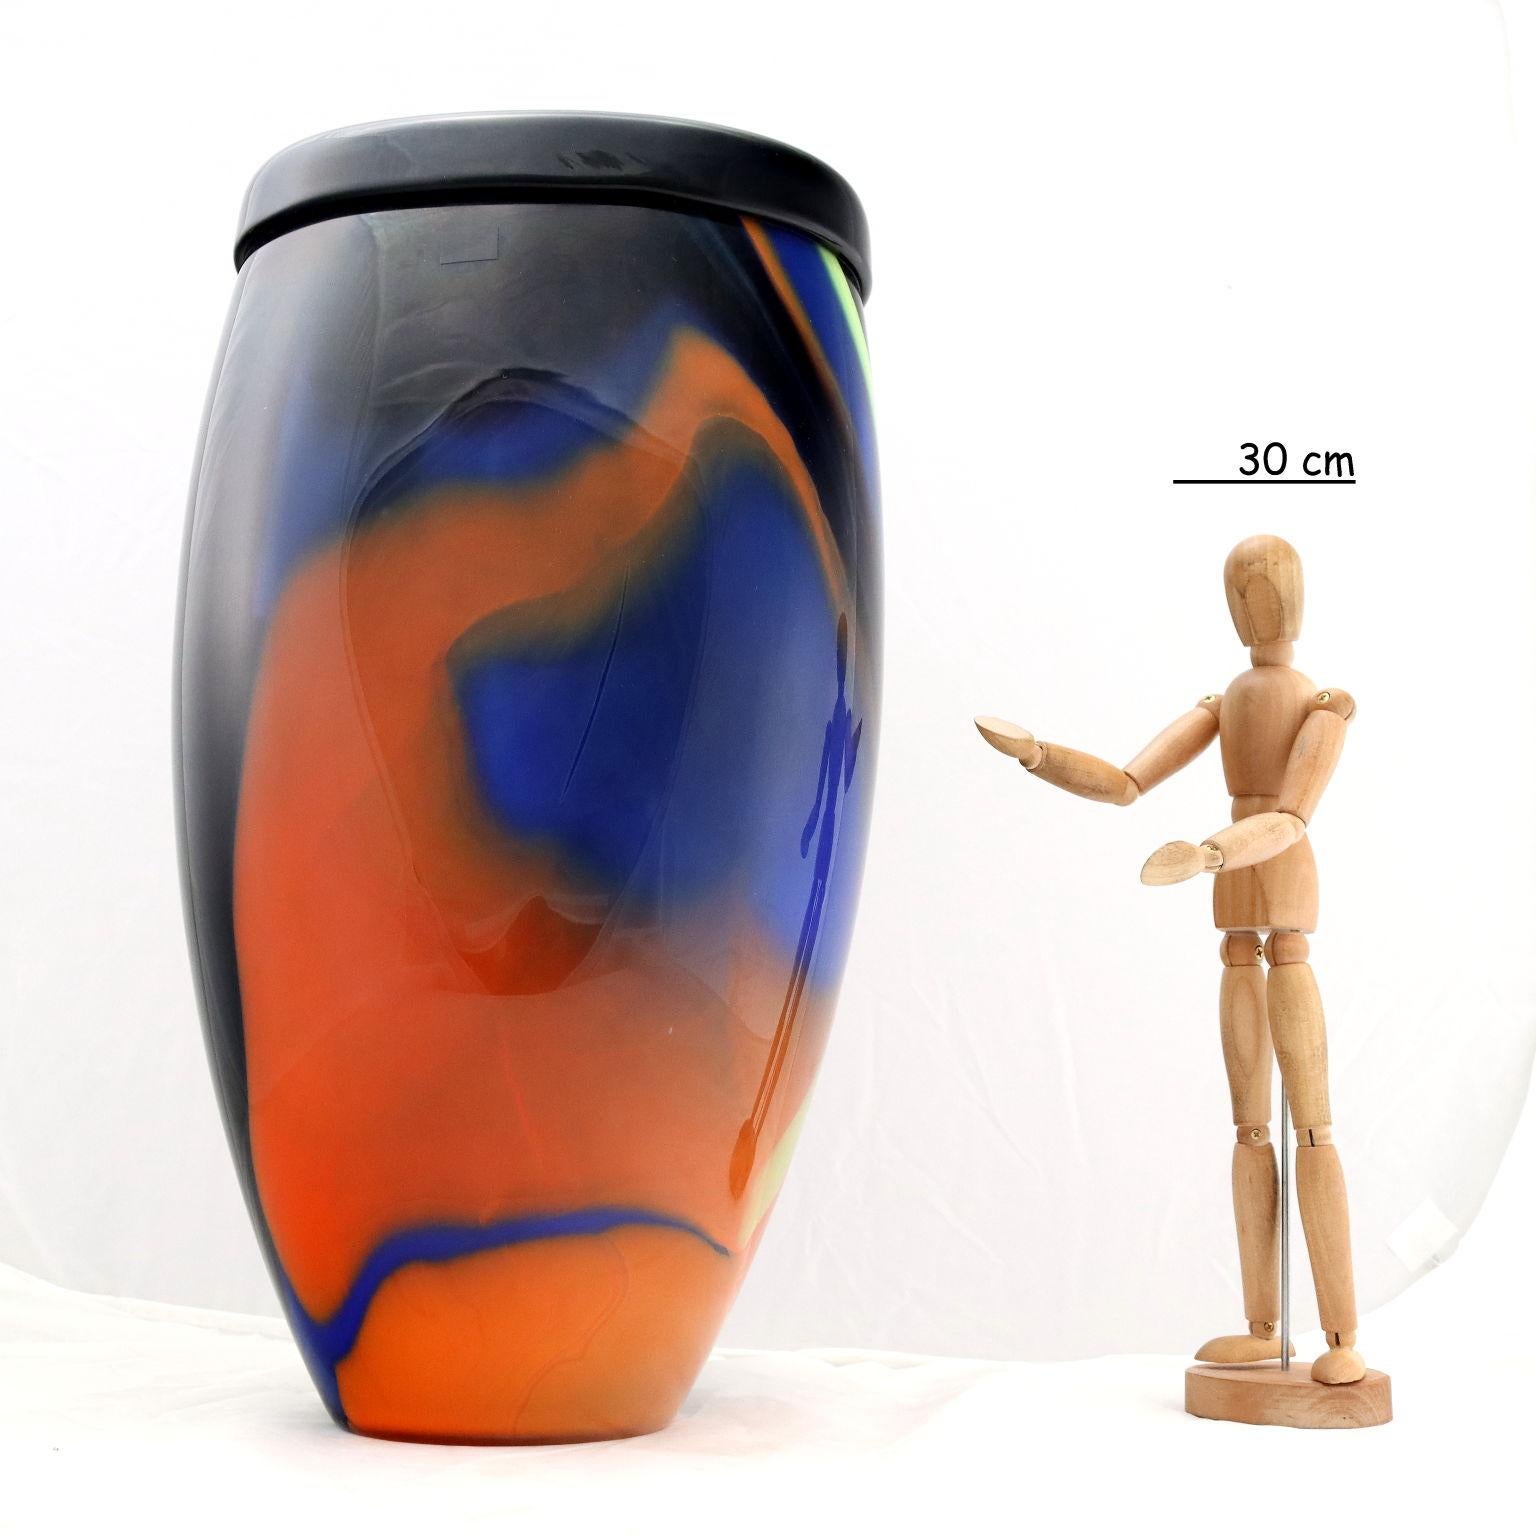 Multi-colored glass vase. The vase is branded 